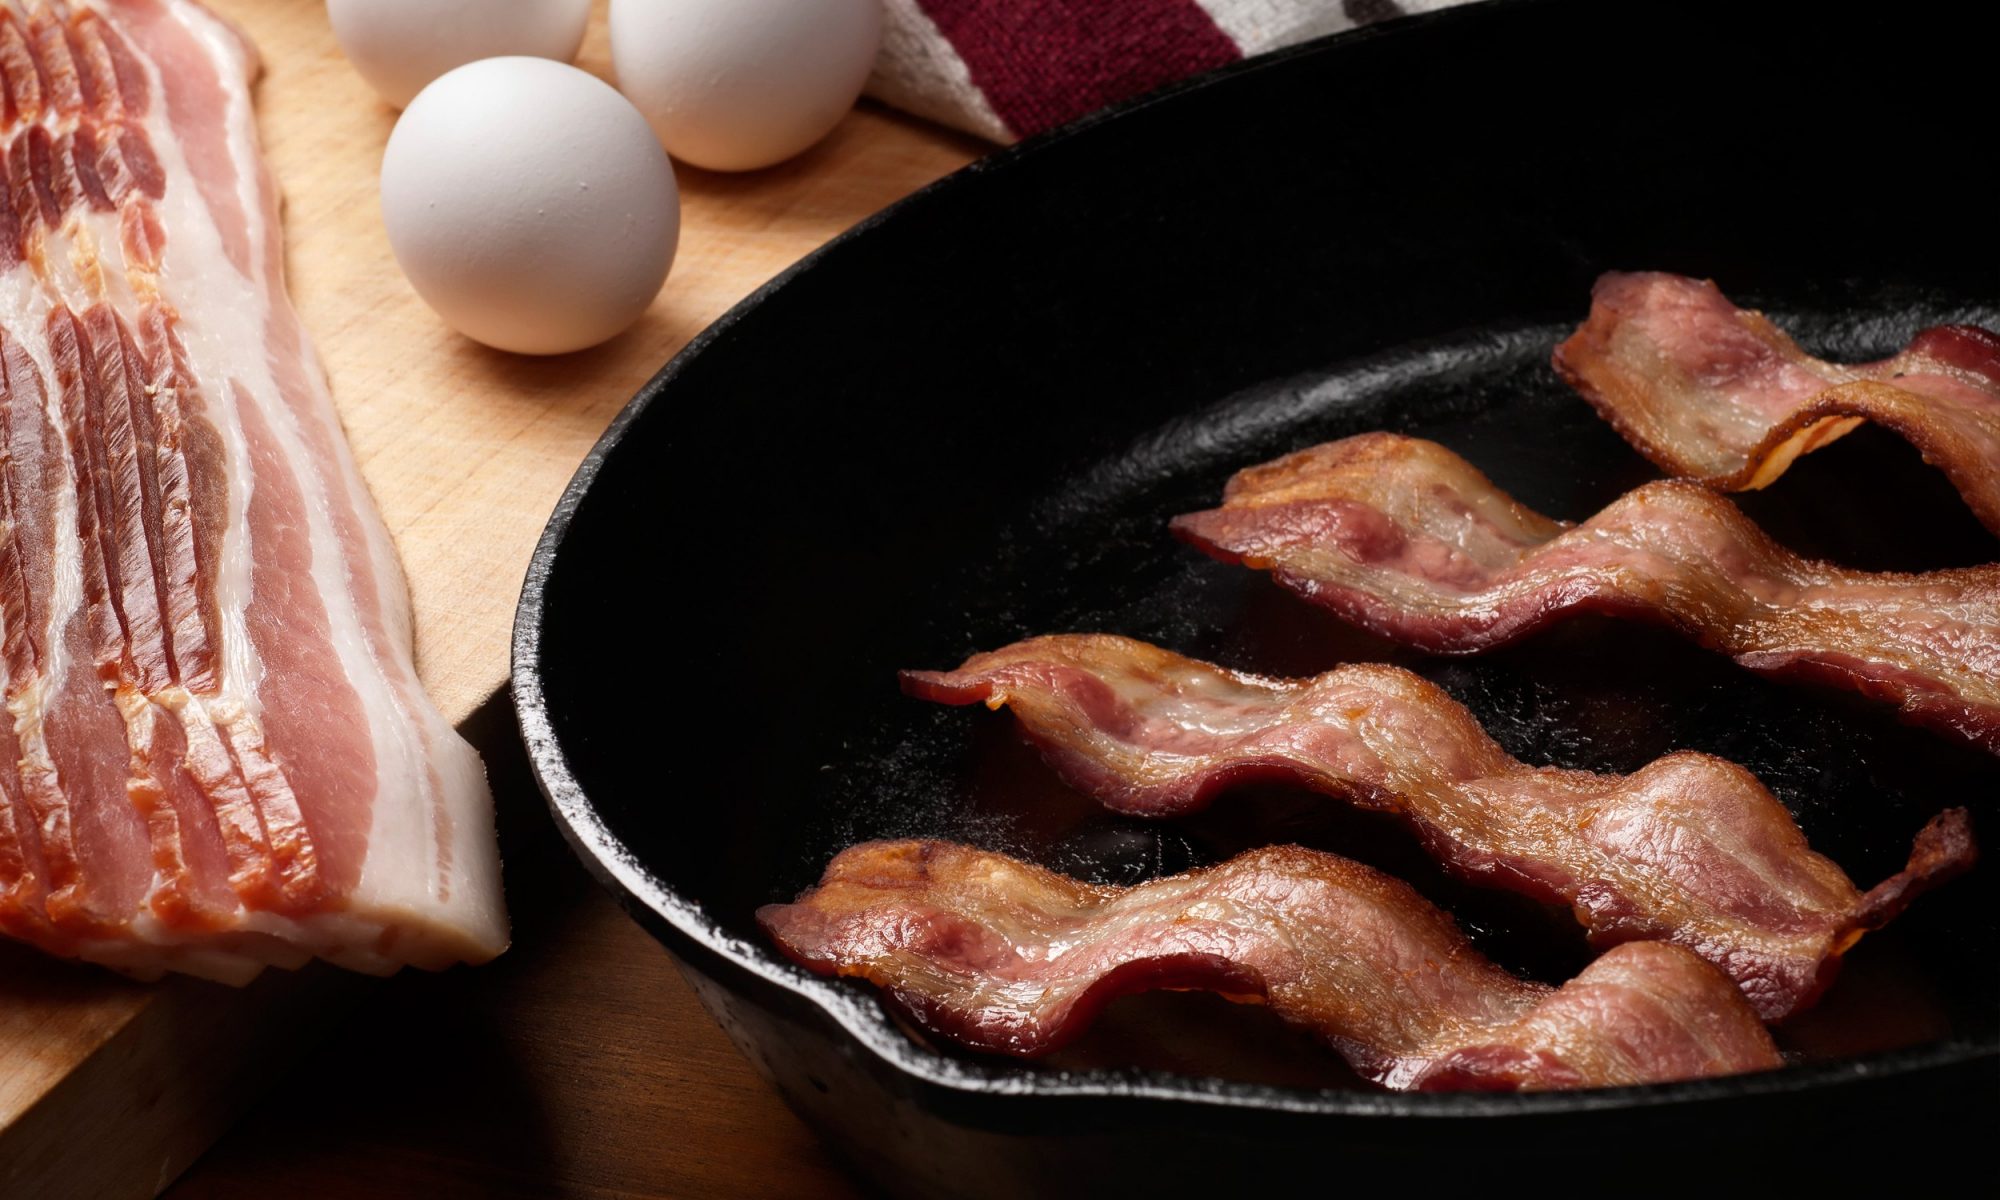 How Long Can You Leave Bacon Out?